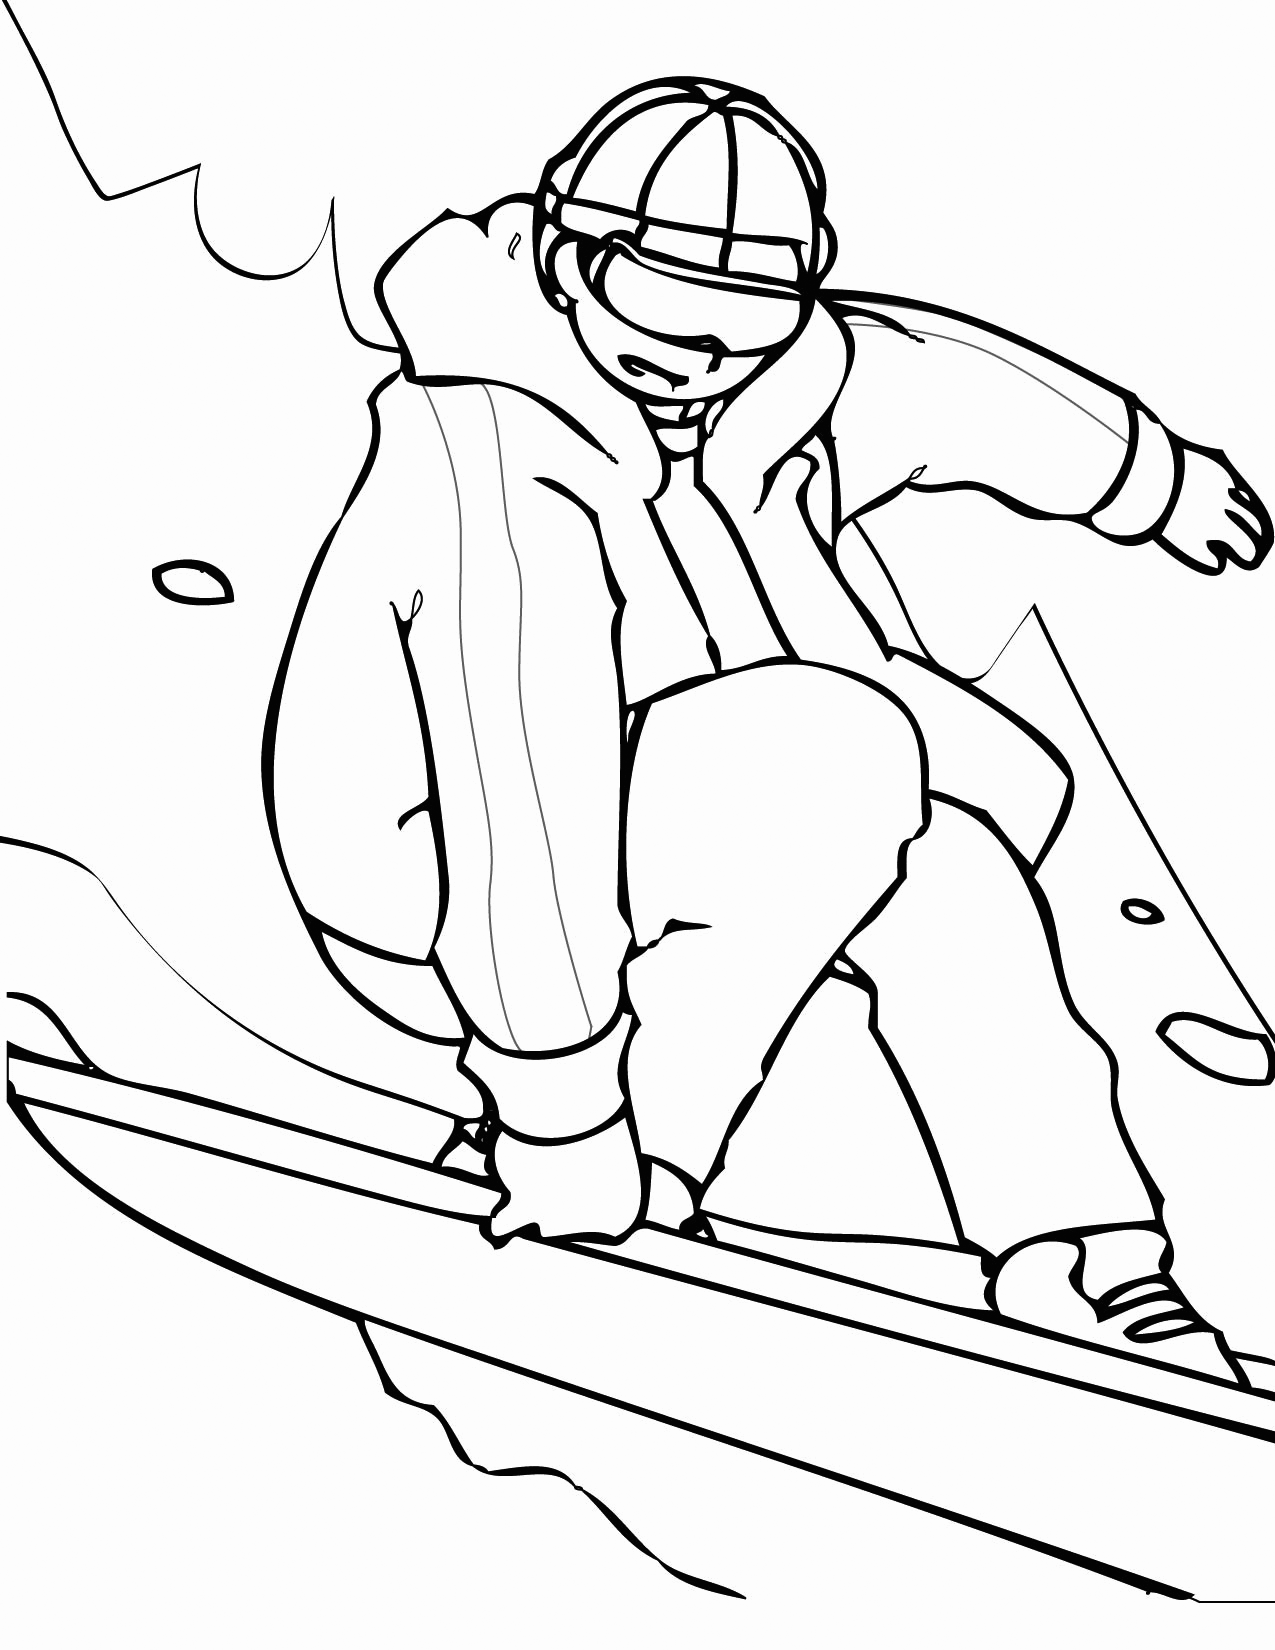 Snowboarding Coloring Pages